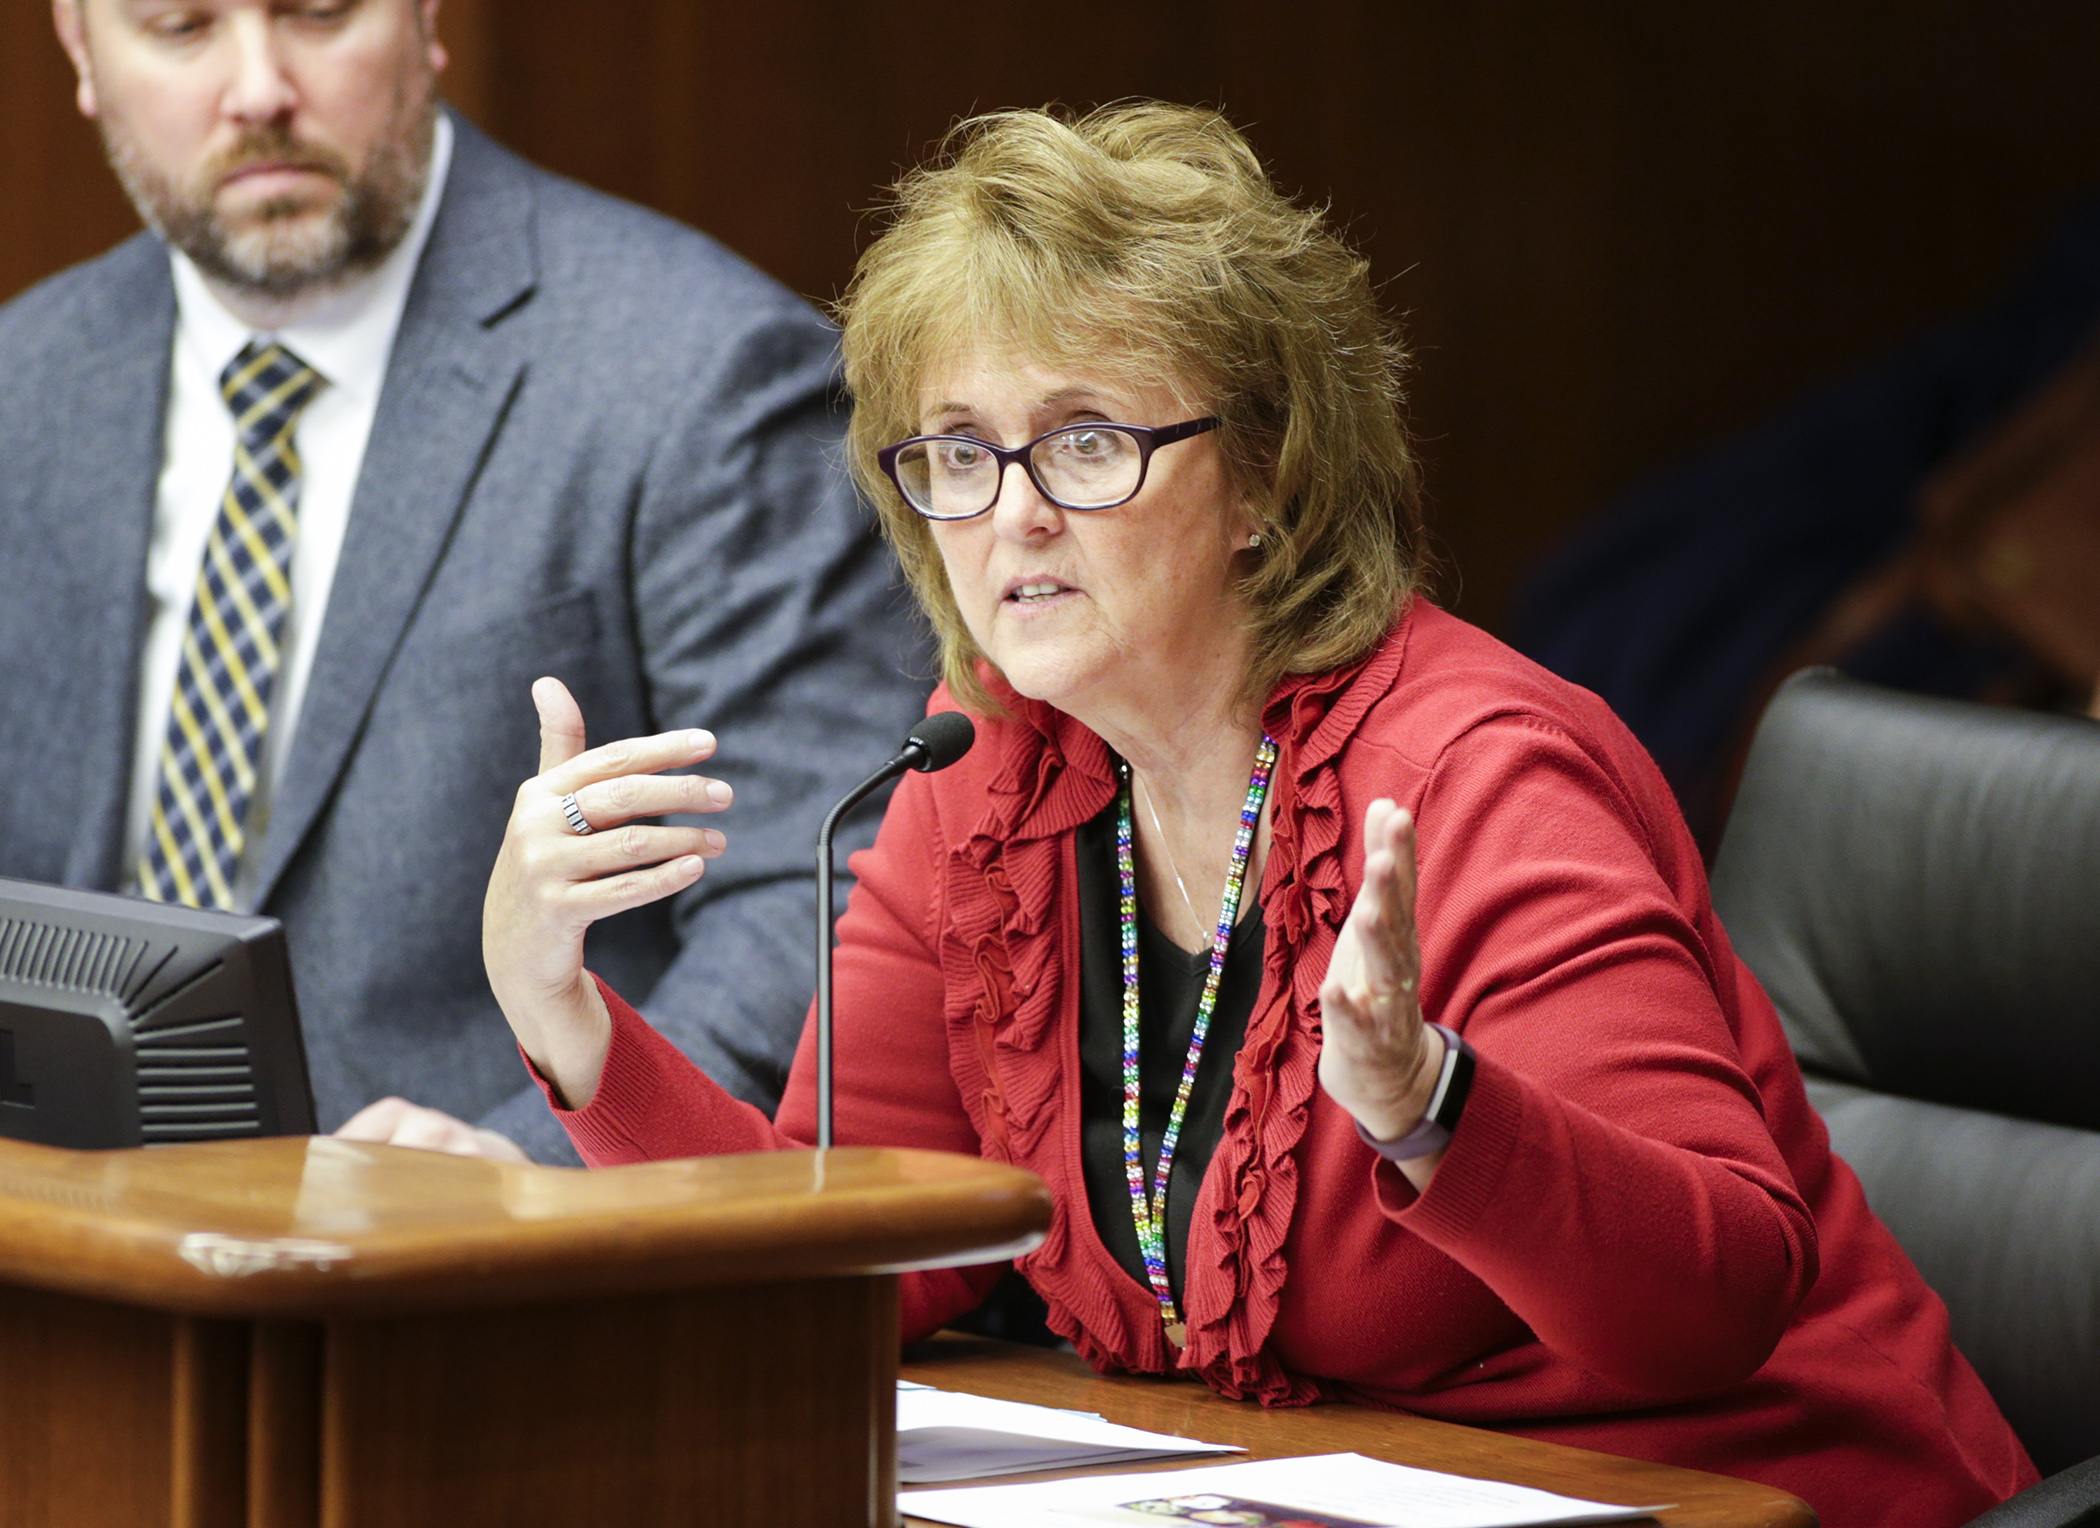 Debra Lukkonen, supervisor for school nutrition programs at the Department of Education, testifies Feb. 5 before the House Education Finance Division about school food nutrition. Photo by Paul Battaglia